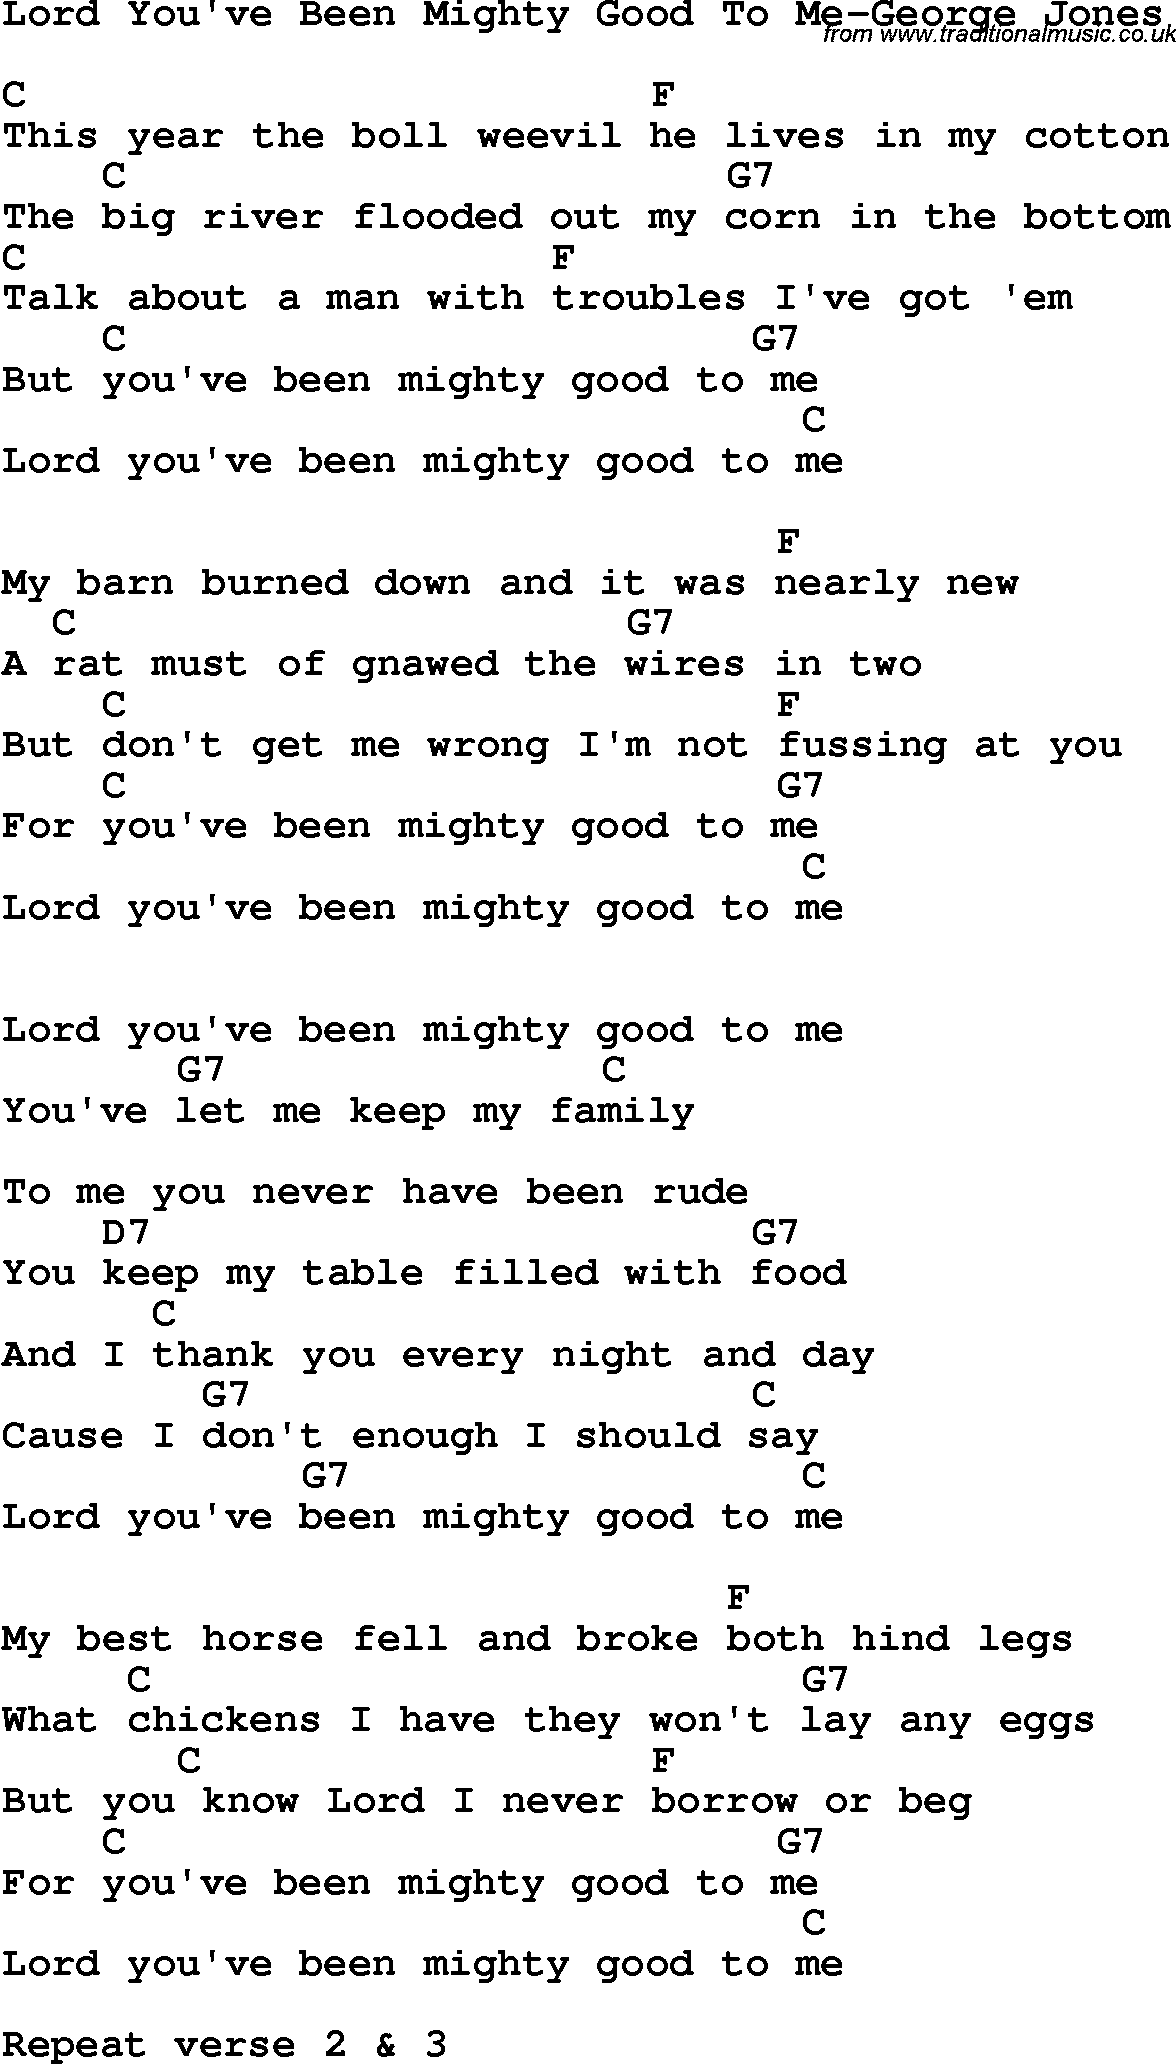 Country, Southern and Bluegrass Gospel Song Lord You've Been Mighty Good To Me-George Jones lyrics and chords